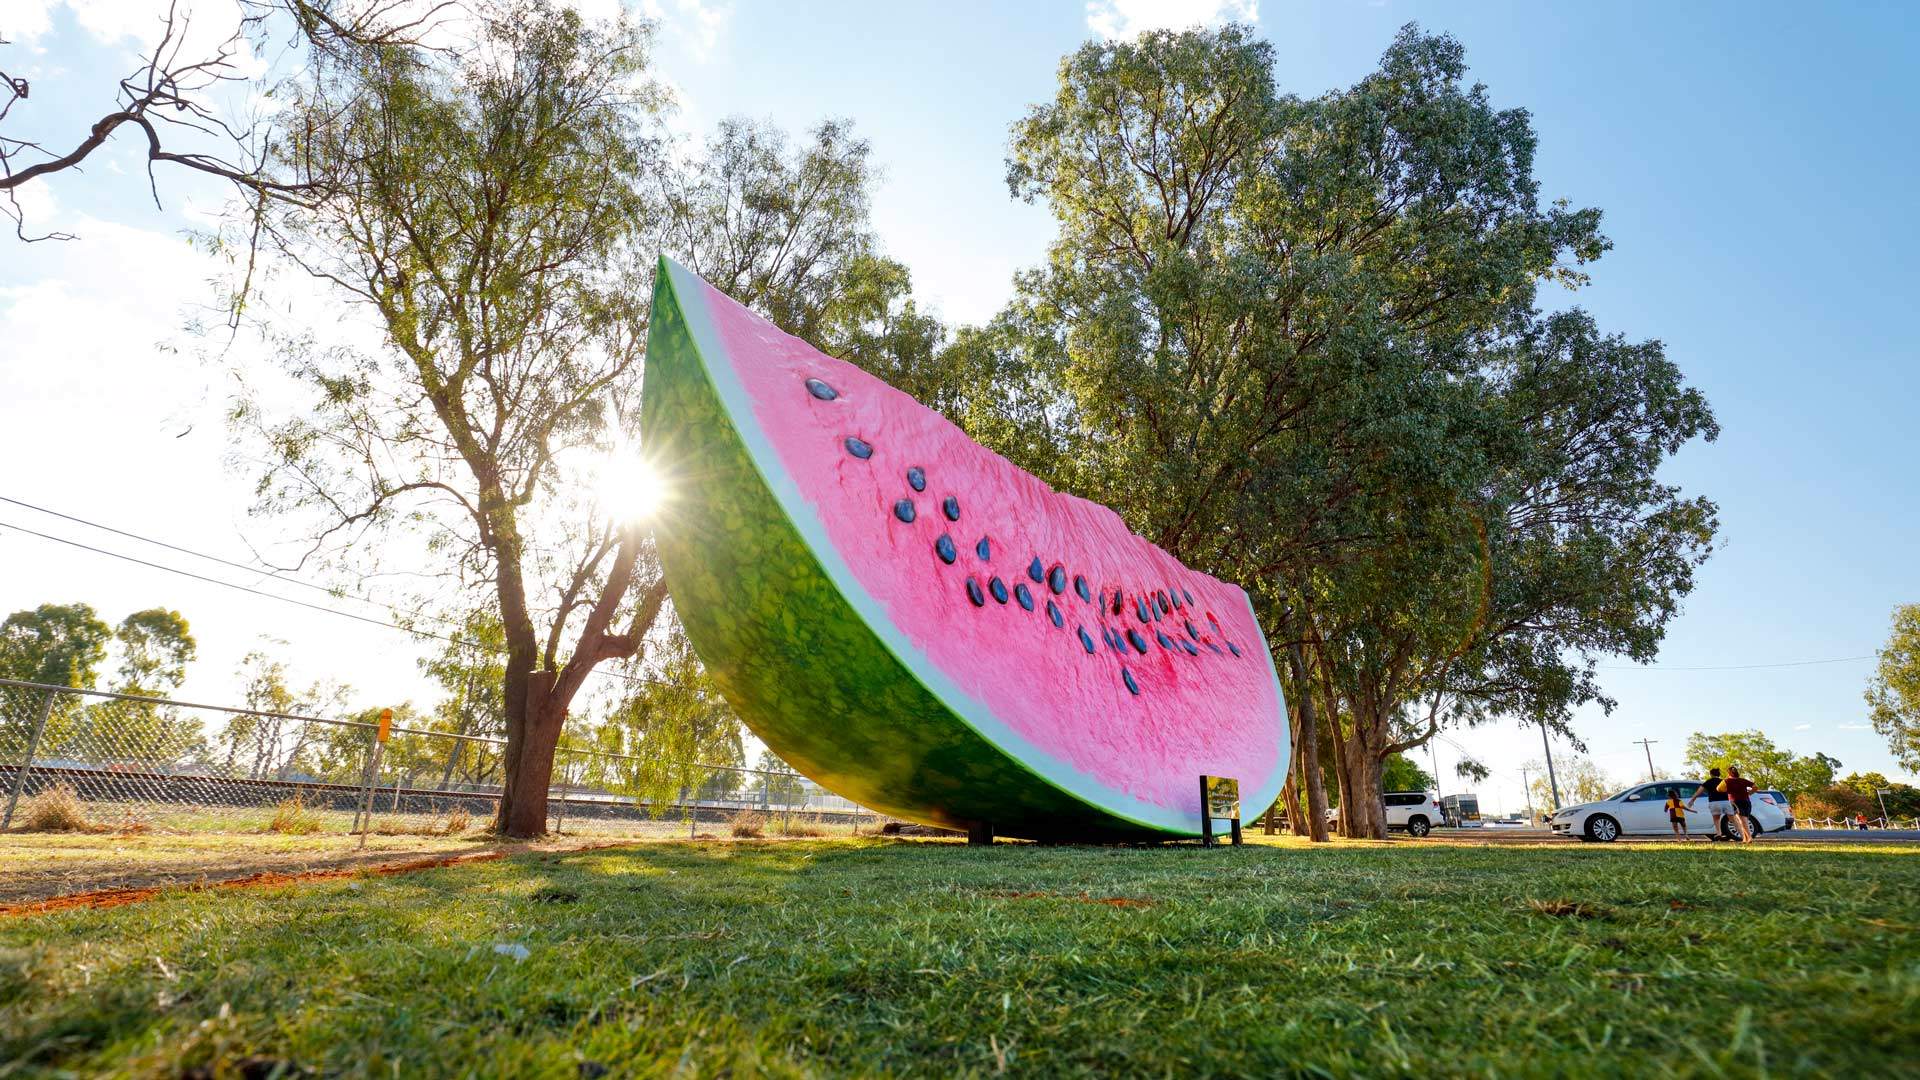 The Big Melon Is Australia's Newest Giant-Sized Tourist Attraction